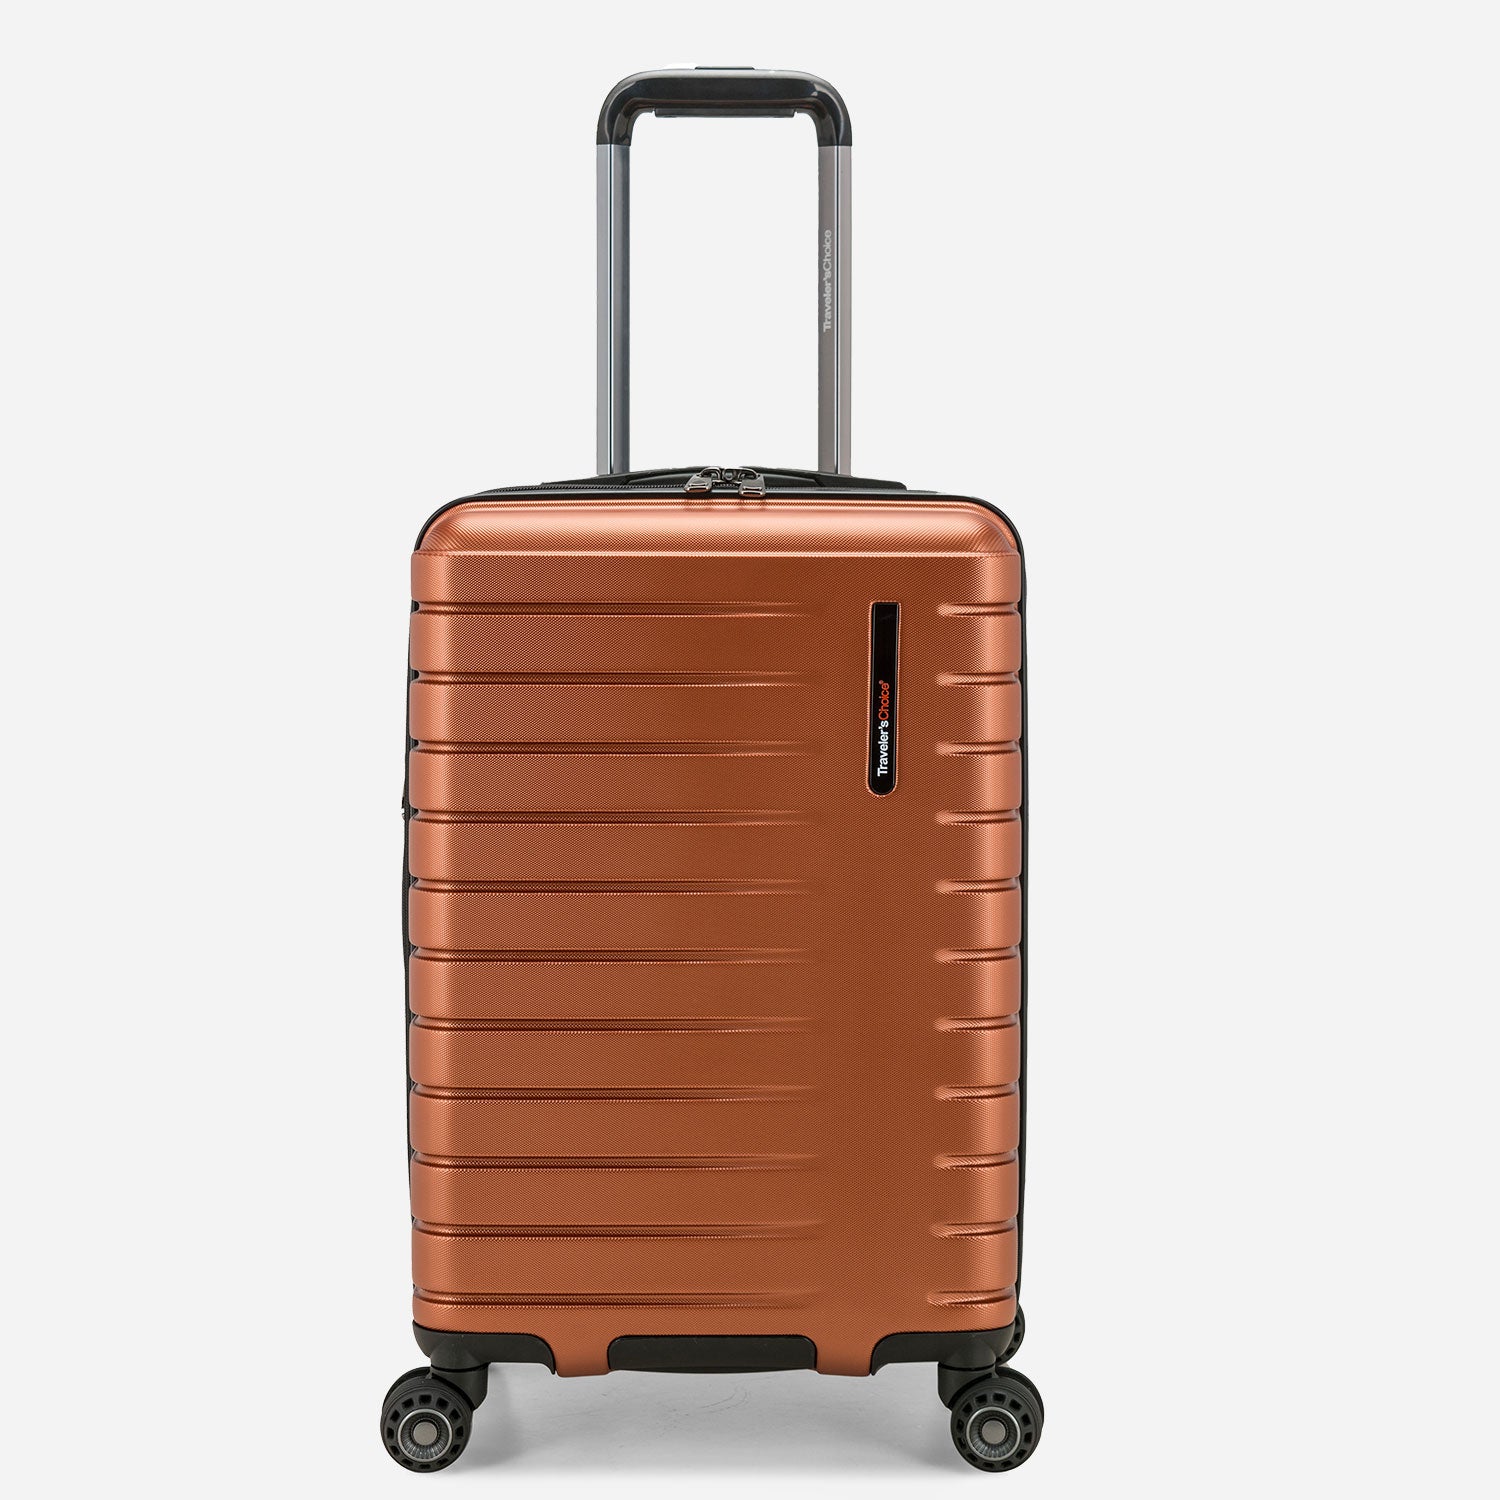 Update Your Carry-On Luggage